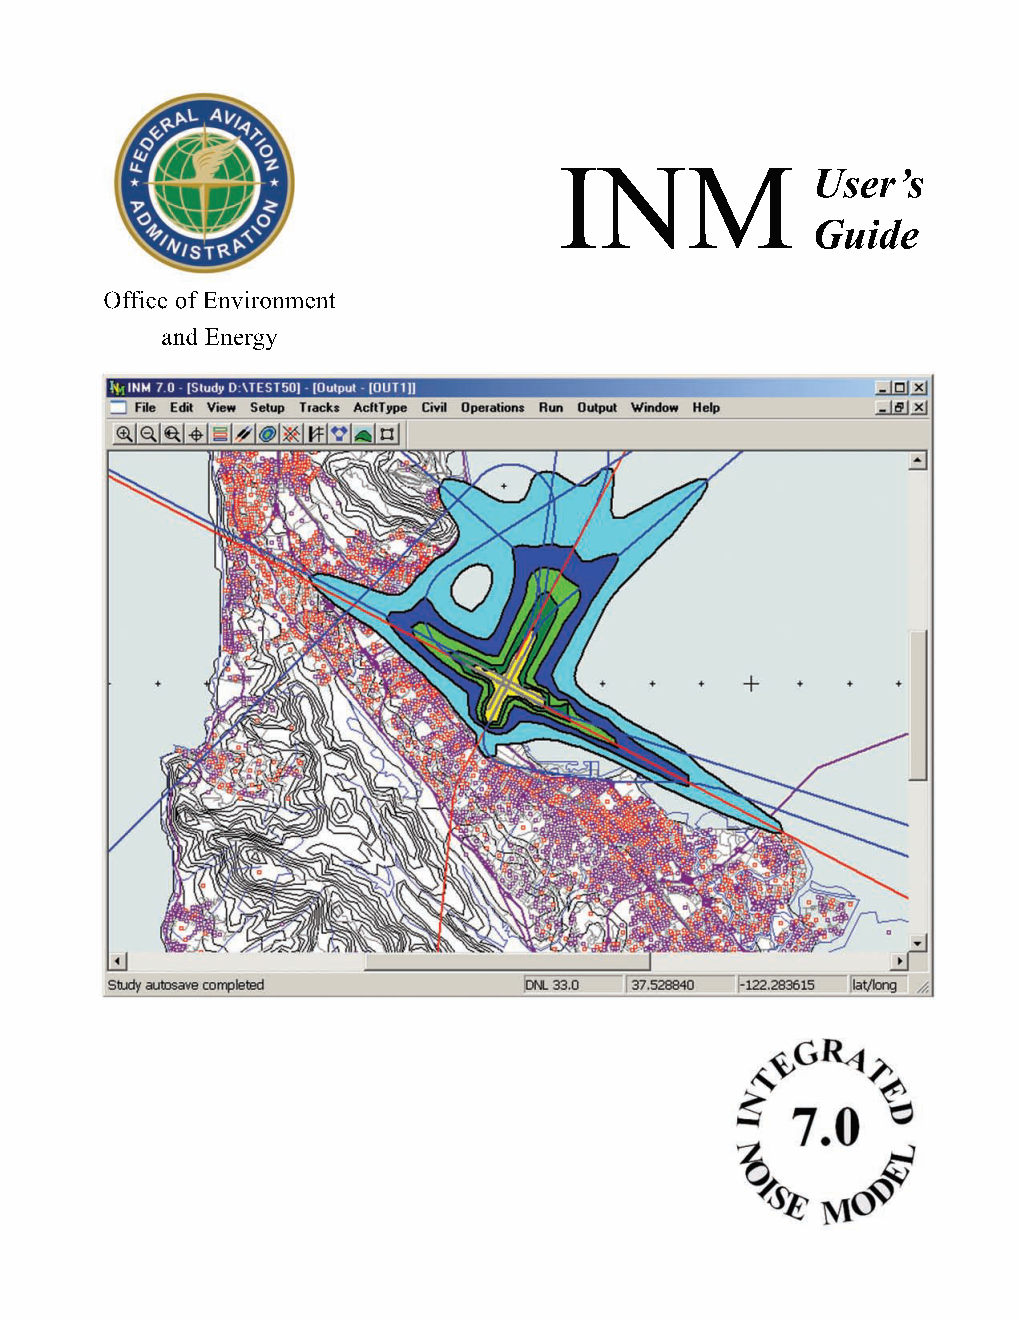 Integrated Noise Model (INM) Version 7.0 User's Guide DTFAAC-05-D-00075 Task Orders 4, 6